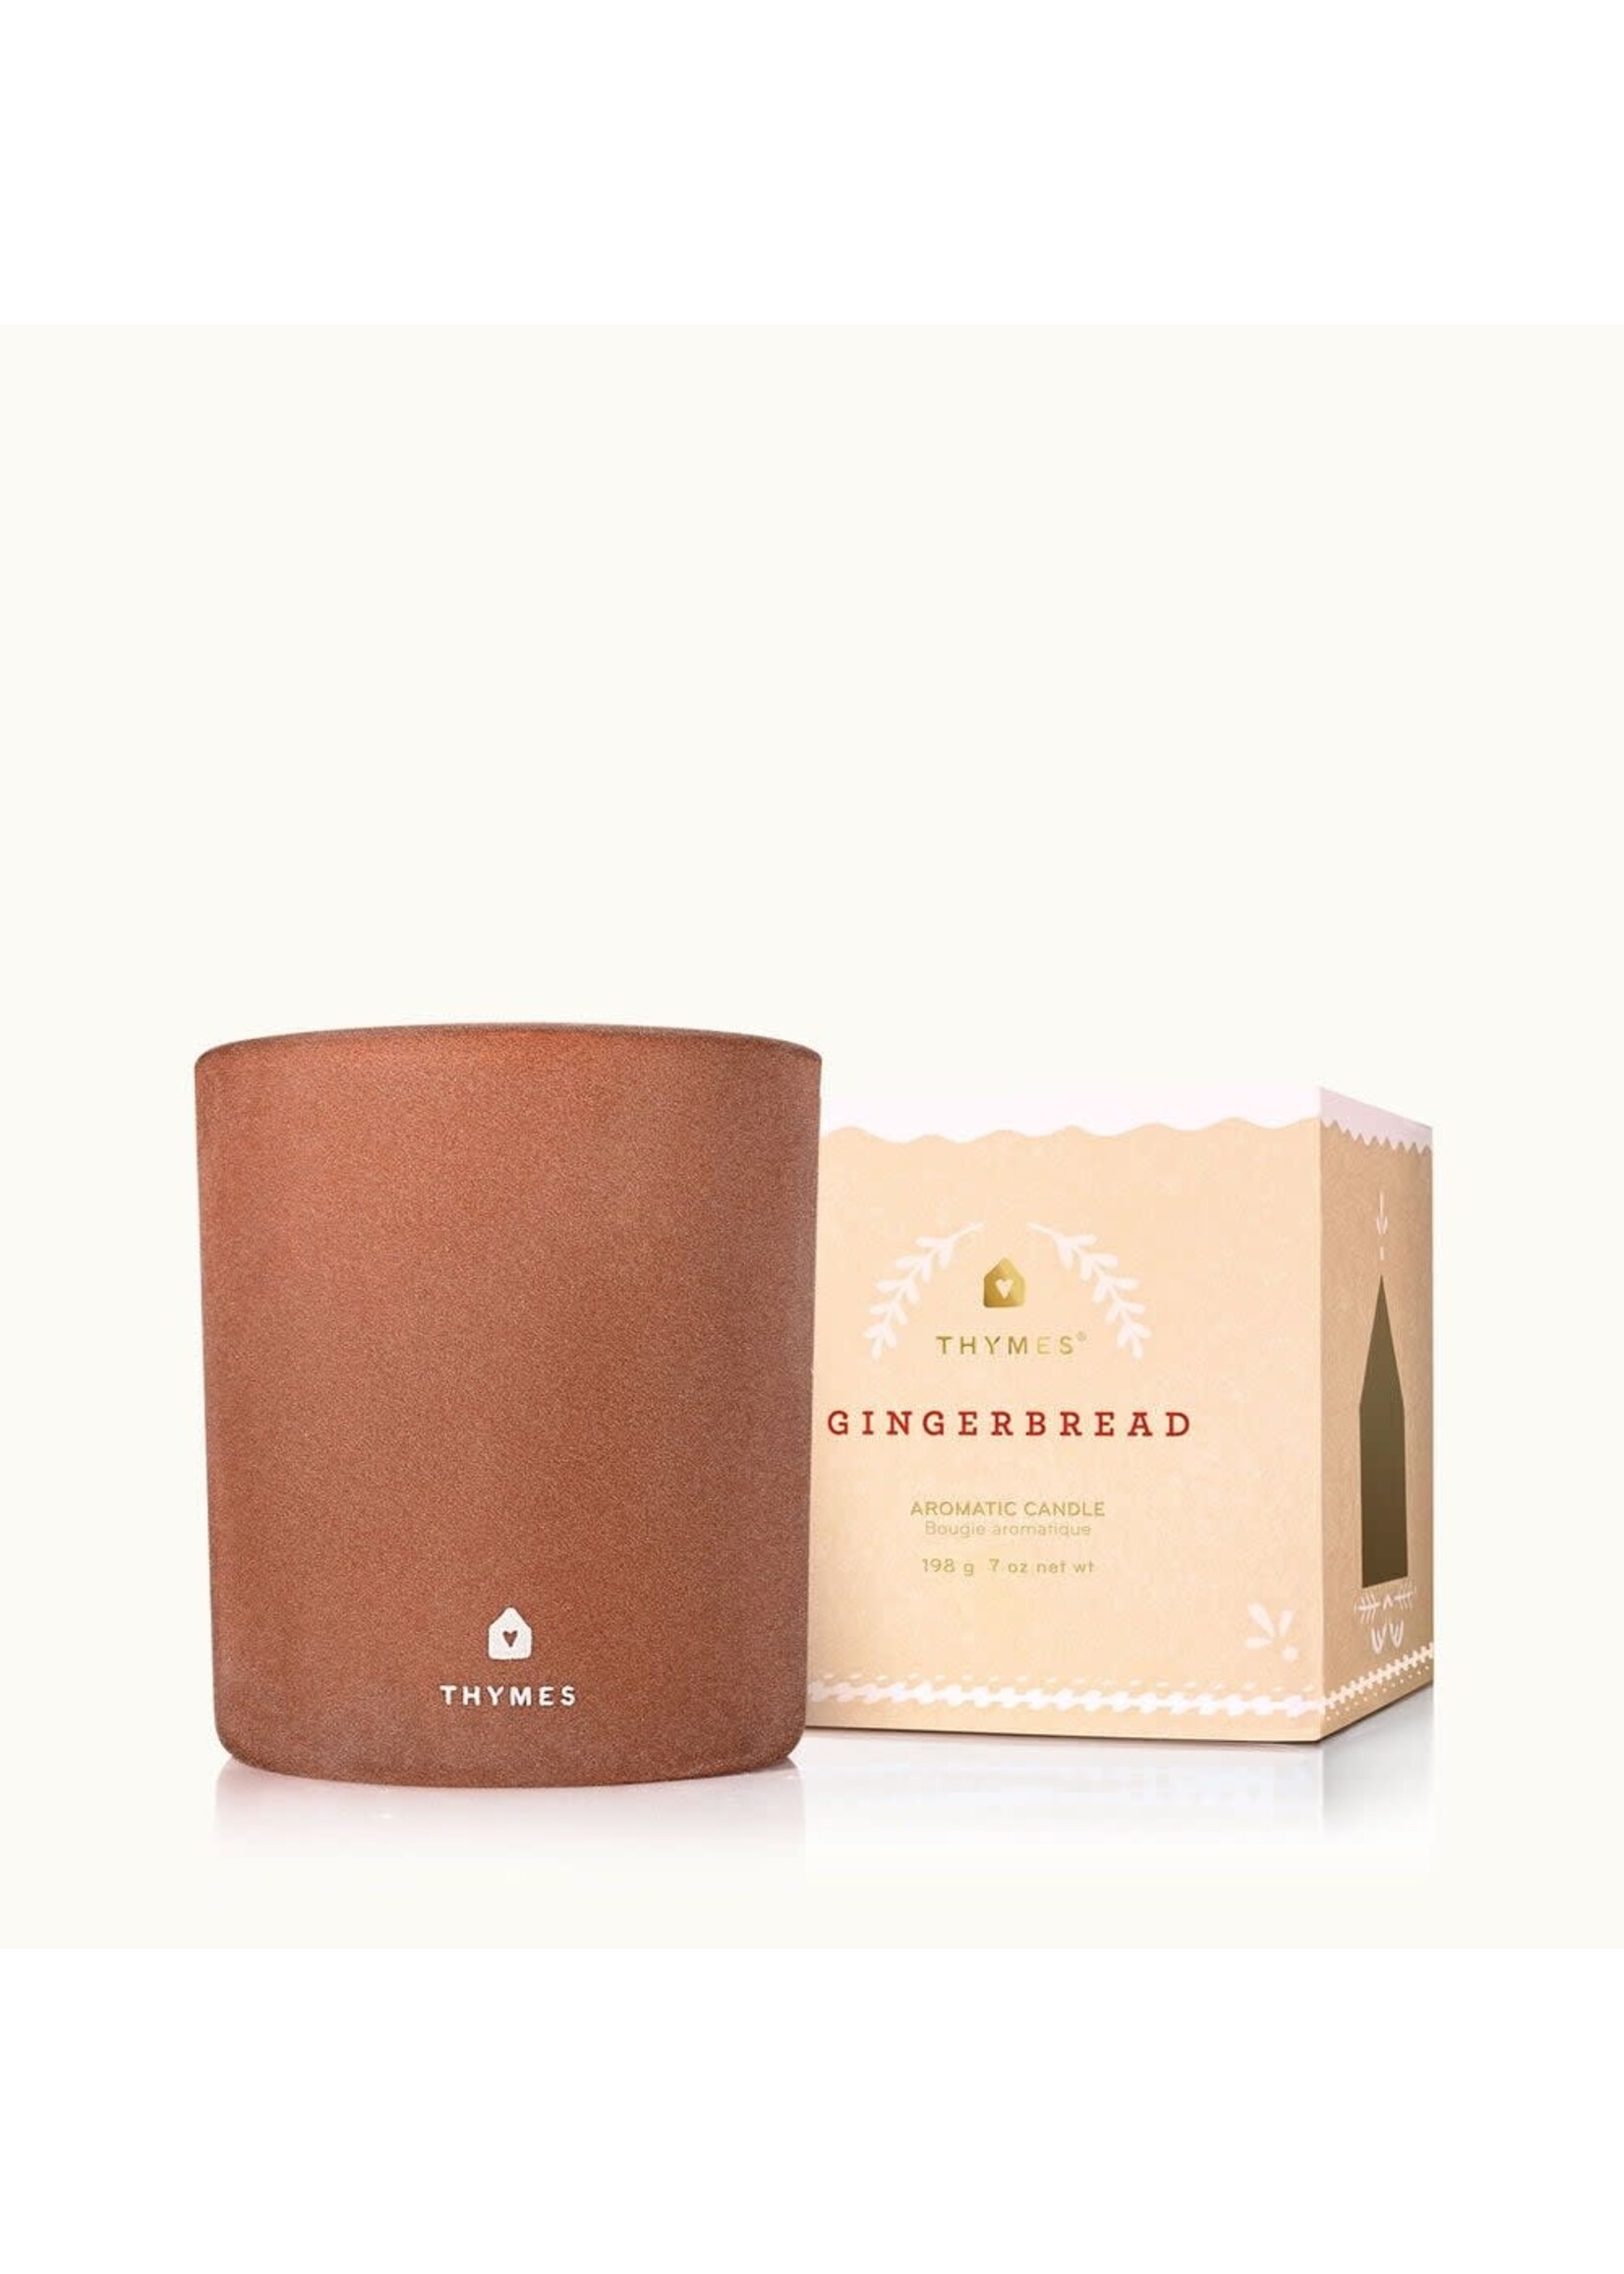 Thymes Gingerbread Candle - Medium